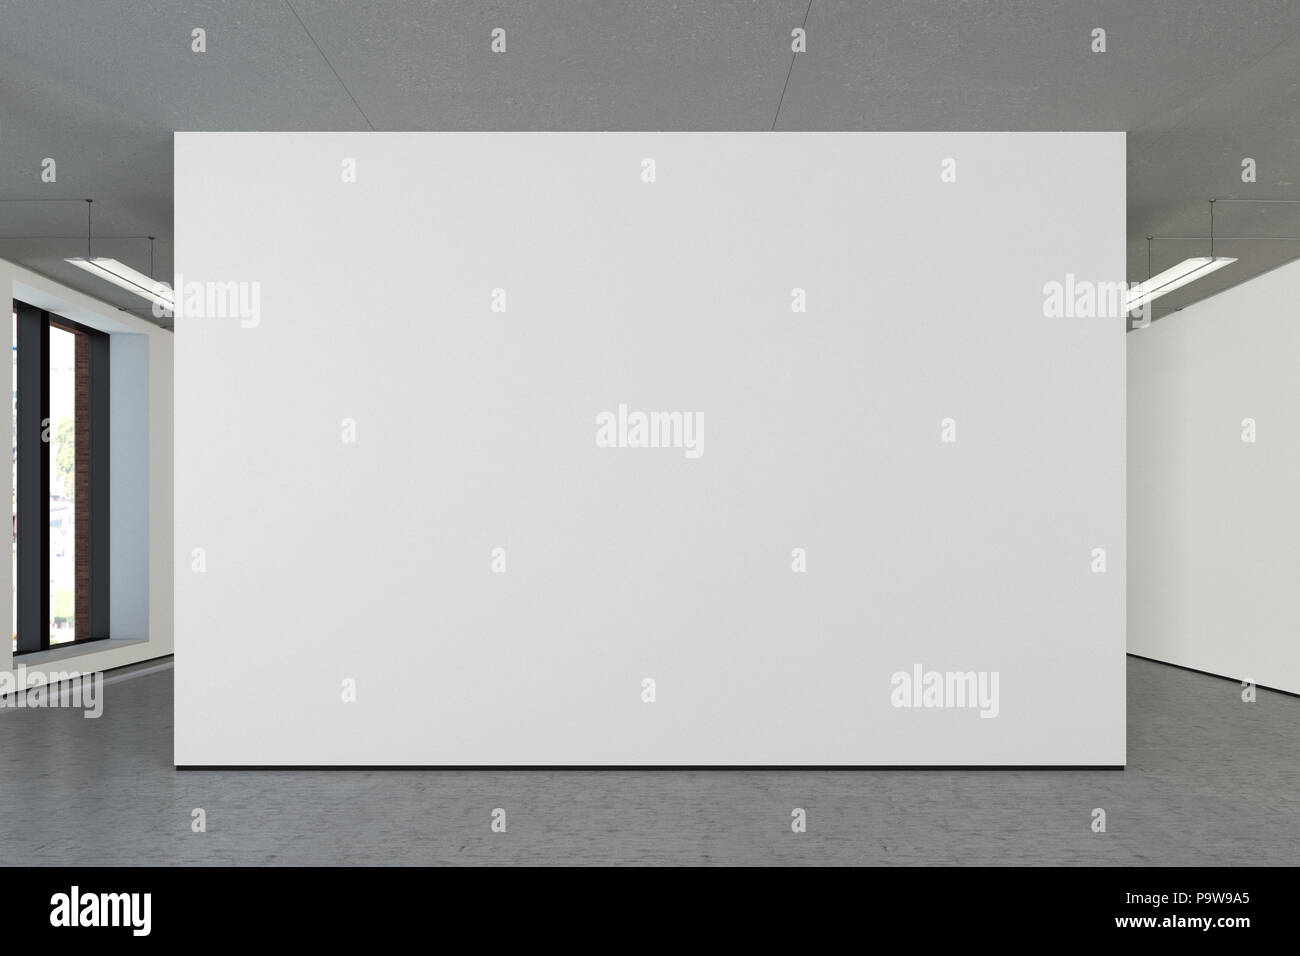 Download Blank Wall In The Gallery Mockup 3d Illustration Stock Photo Alamy